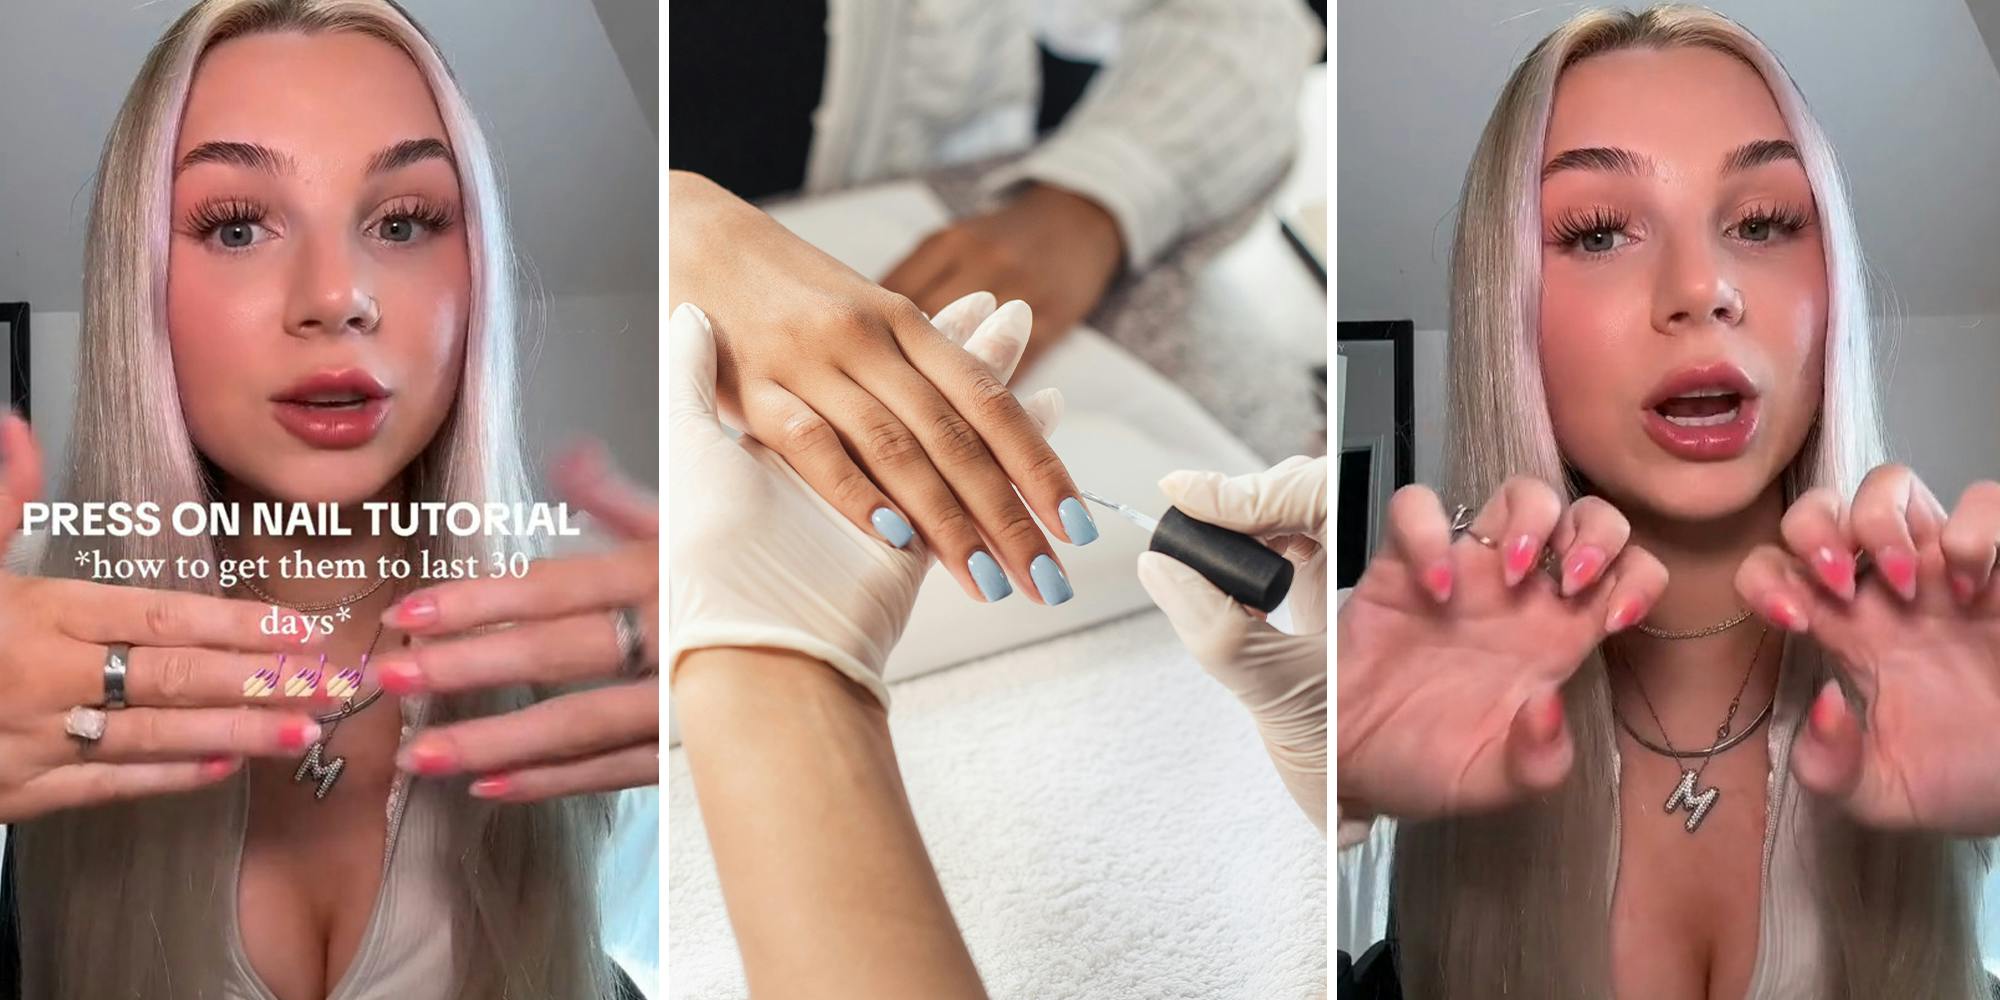 Woman shares trick to making press-on nails last 30 days